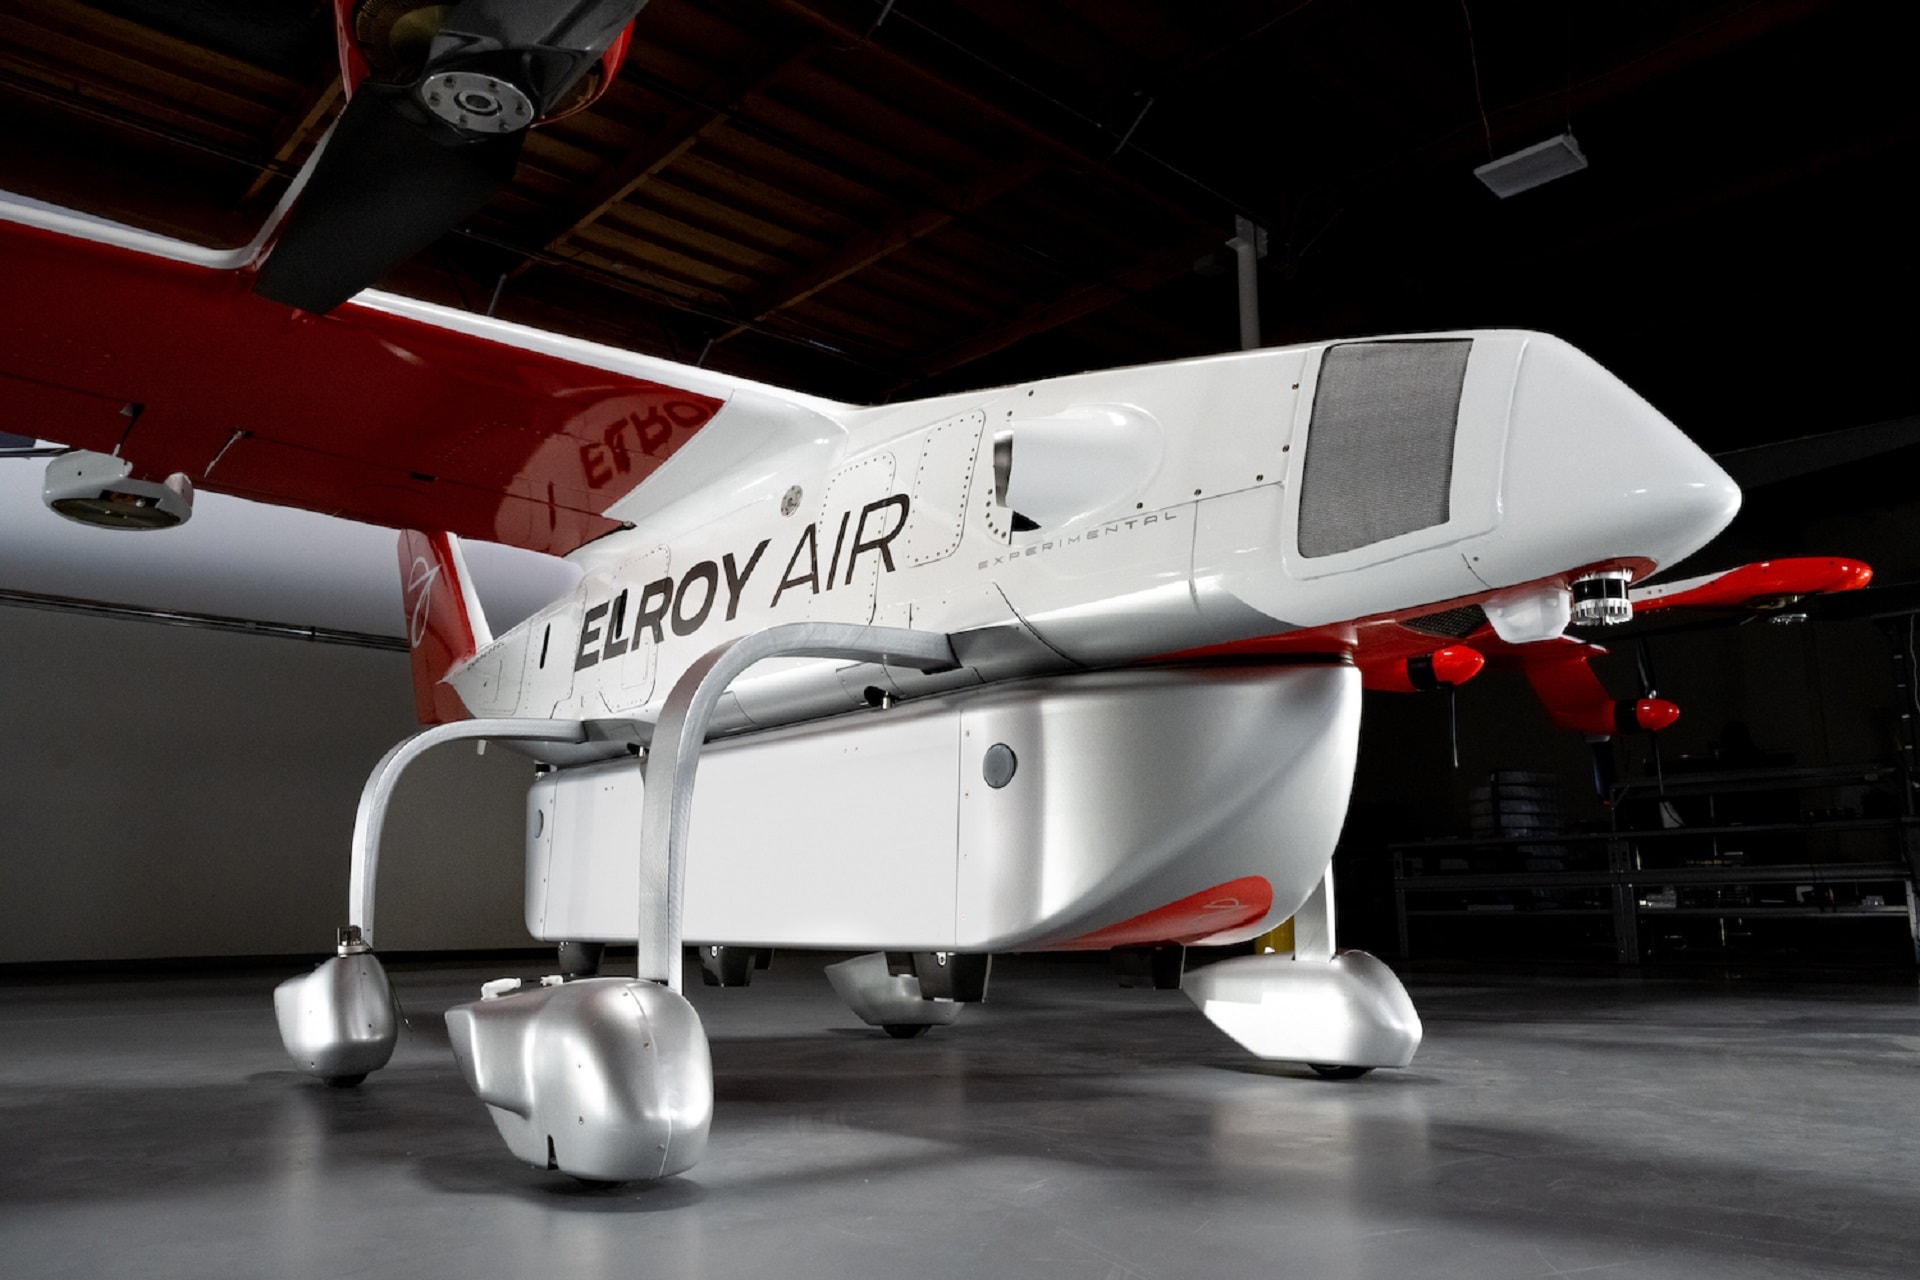 Hybrid-Electric Chaparral VTOL Can Carry 500 Lb for 300 Miles in Its Boat-Like Cargo Pod